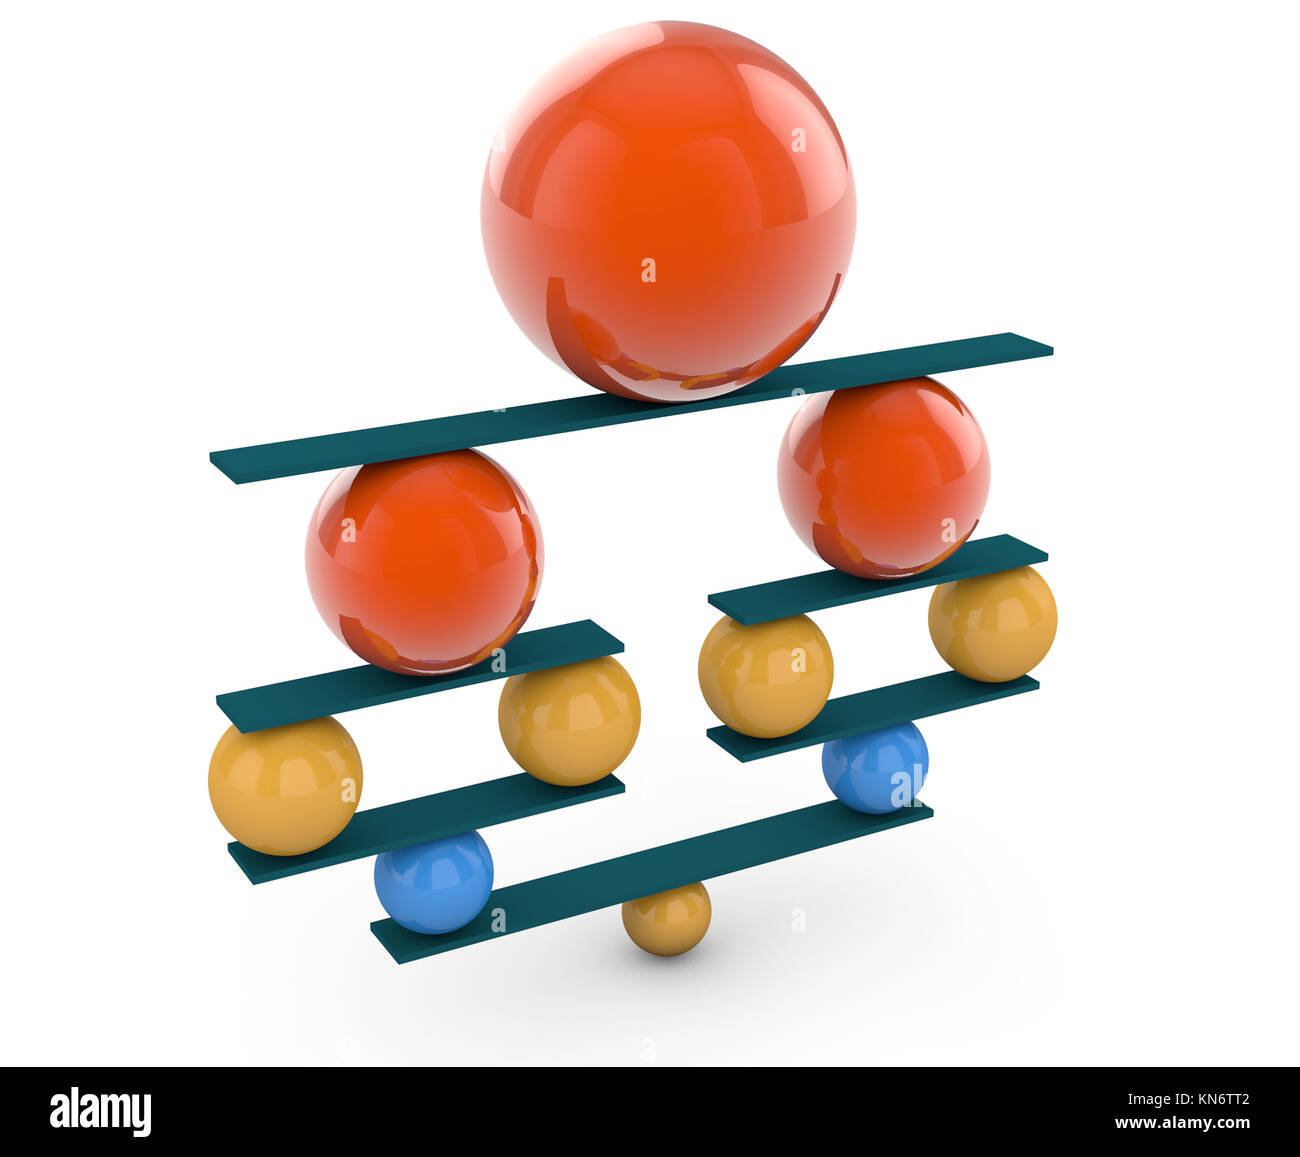 3d rendering. Colorful balls in perfect balance Stock Photo